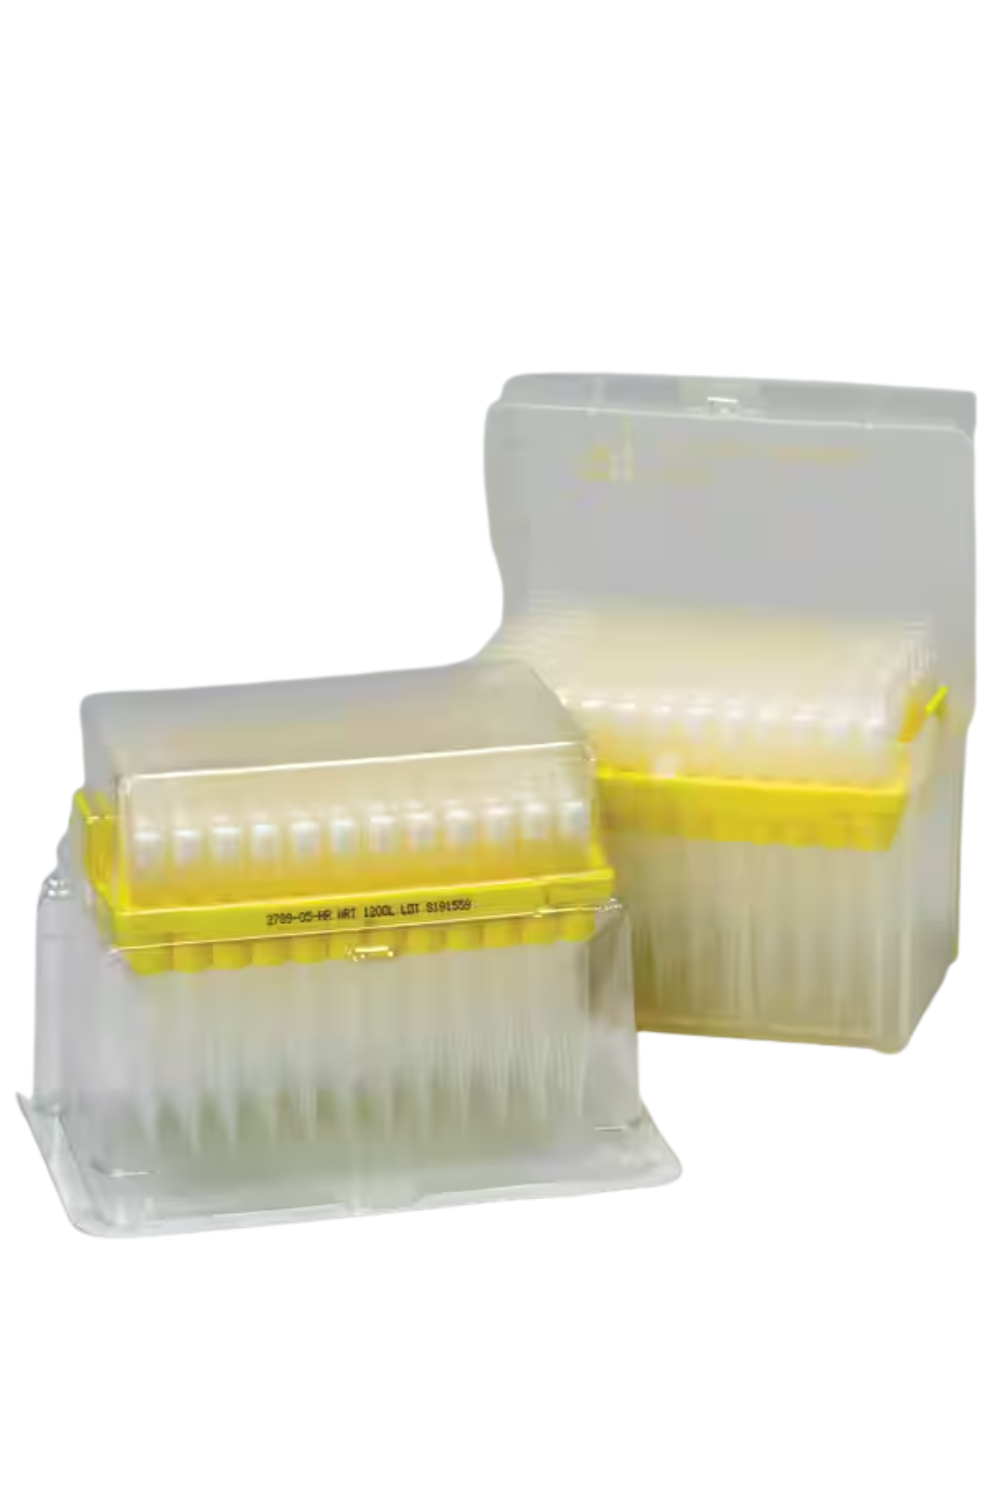 1200ul SoftFit-L, Filtered Low Retention Pipette Tips in Reload Inserts, Overpack of 3072 Tips (12914047)